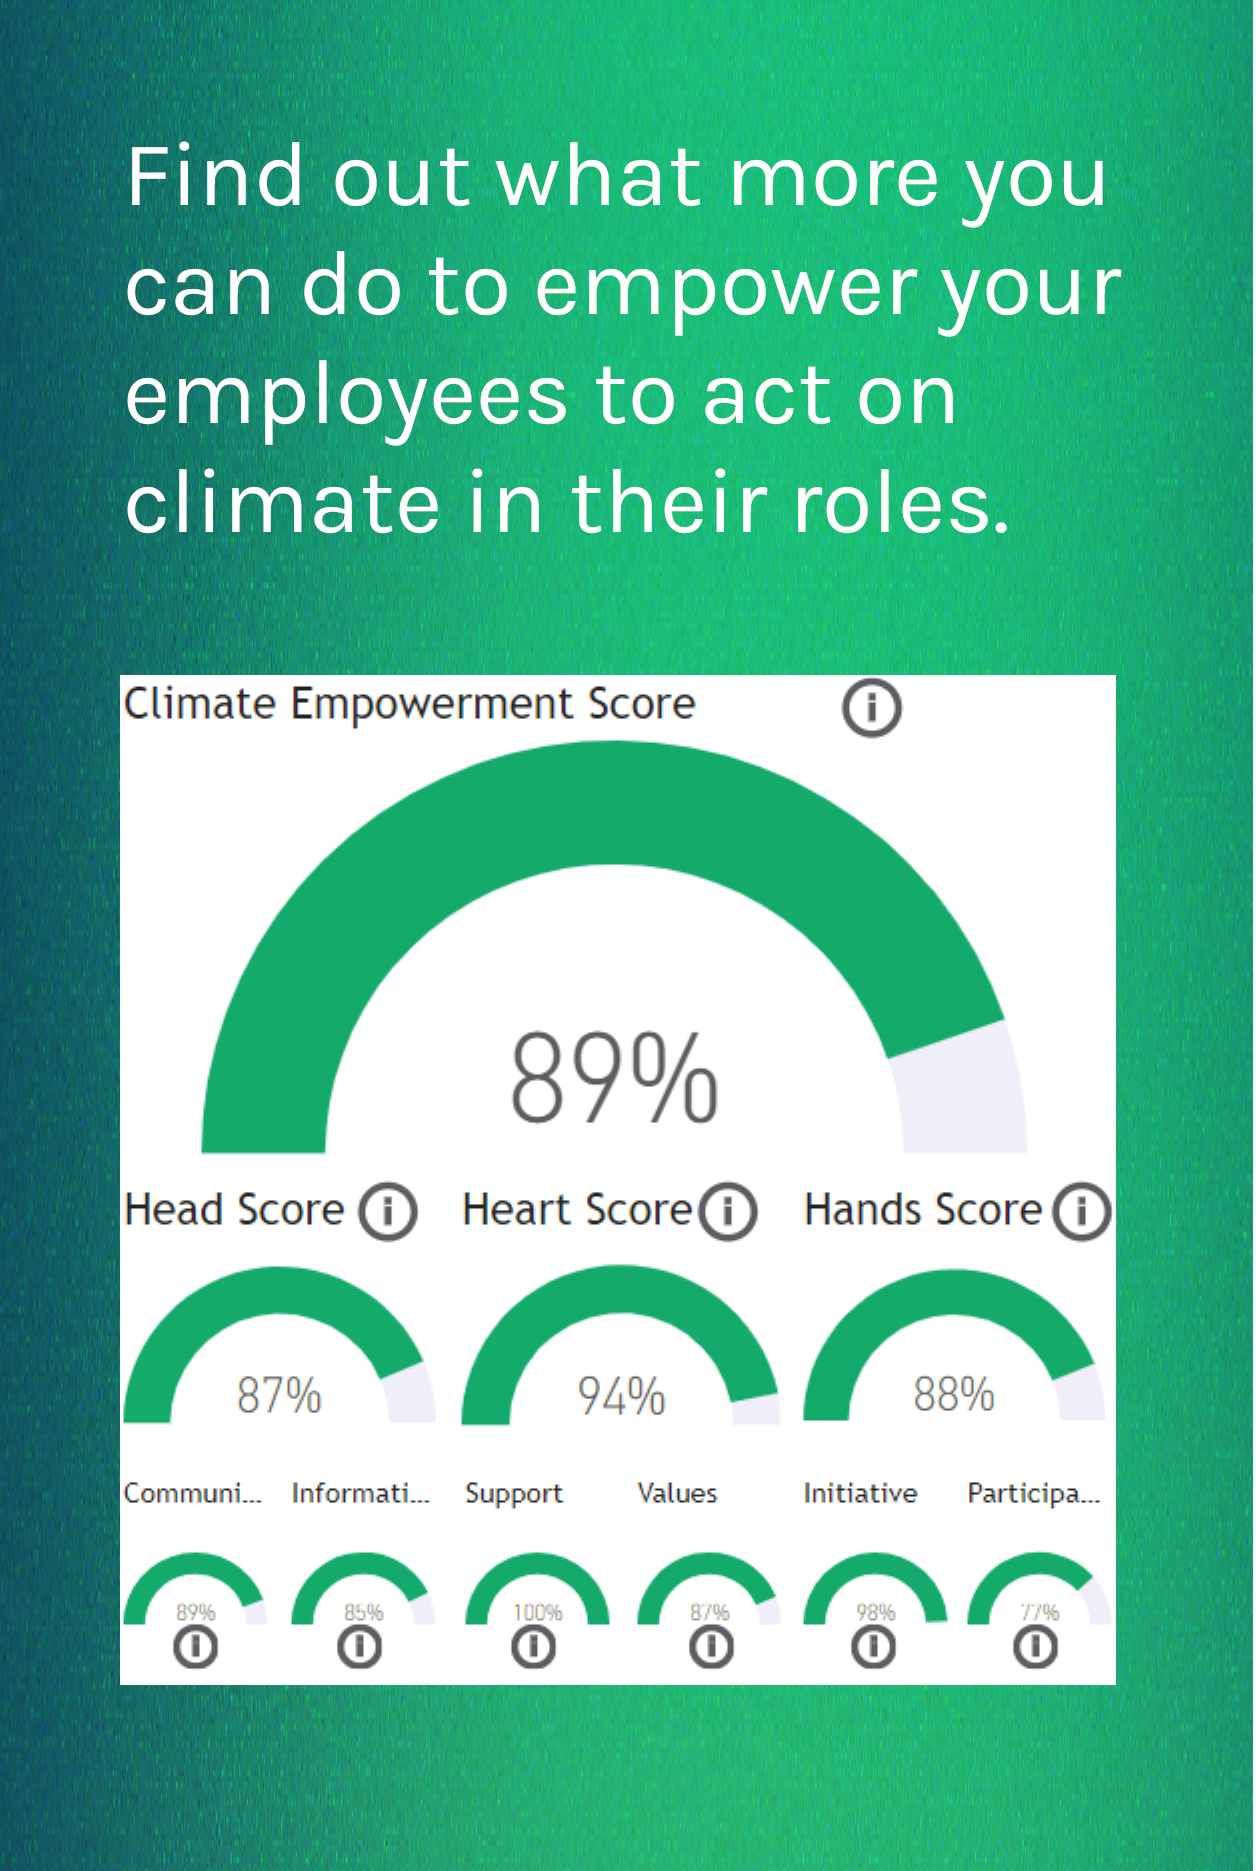 Find out what more you can do to empower your employees to act on climate in their roles